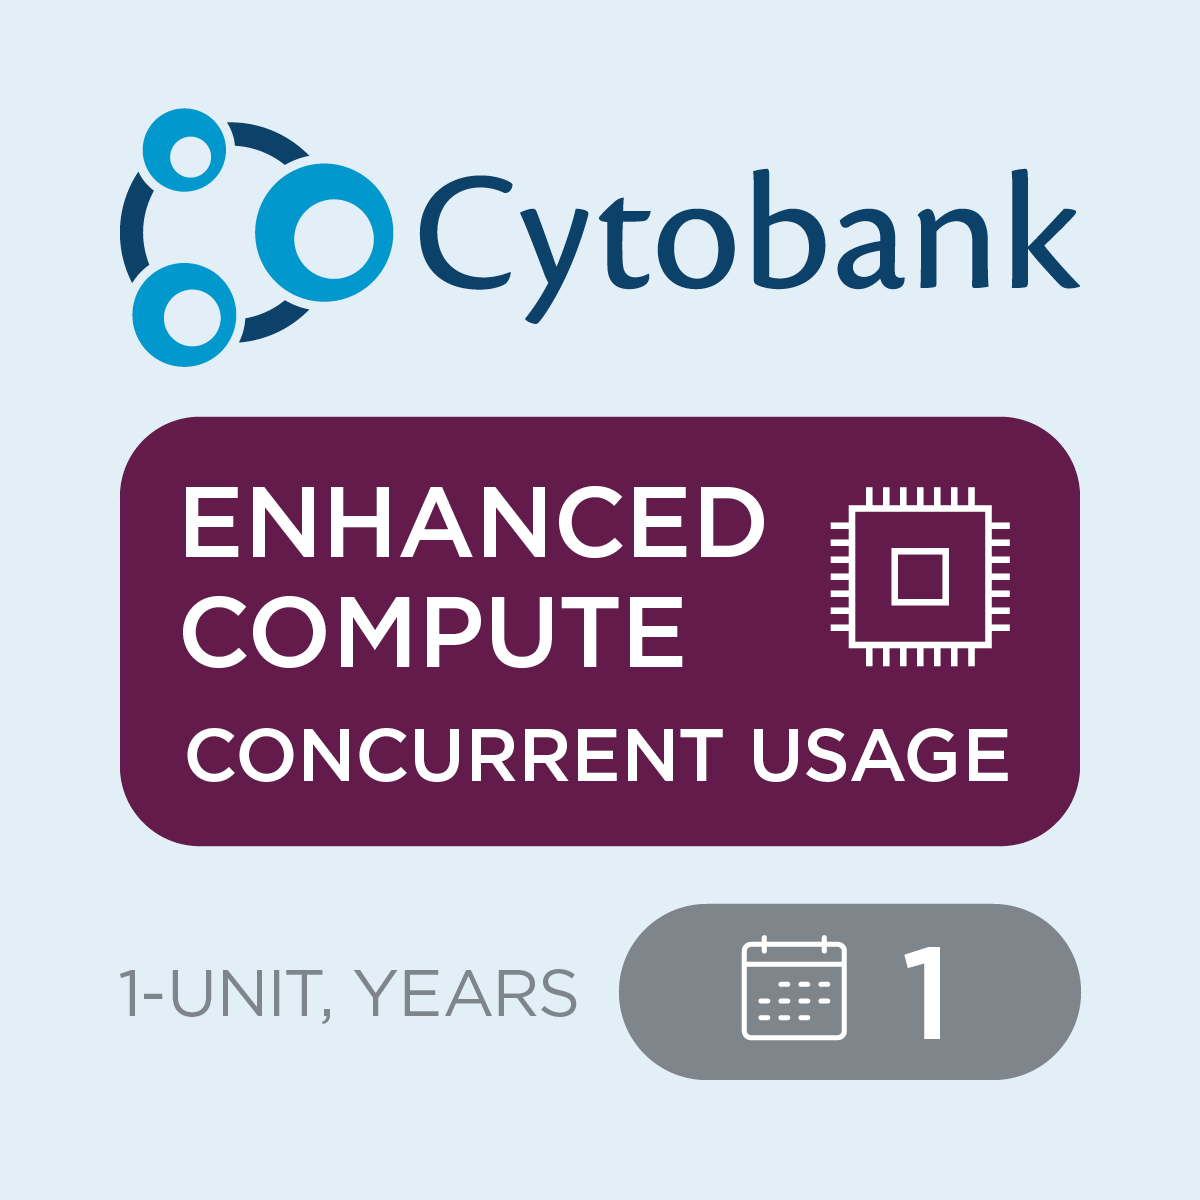 c47413, Cytobank Enhanced Compute for Concurrent Usage, 1-unit, 1-year